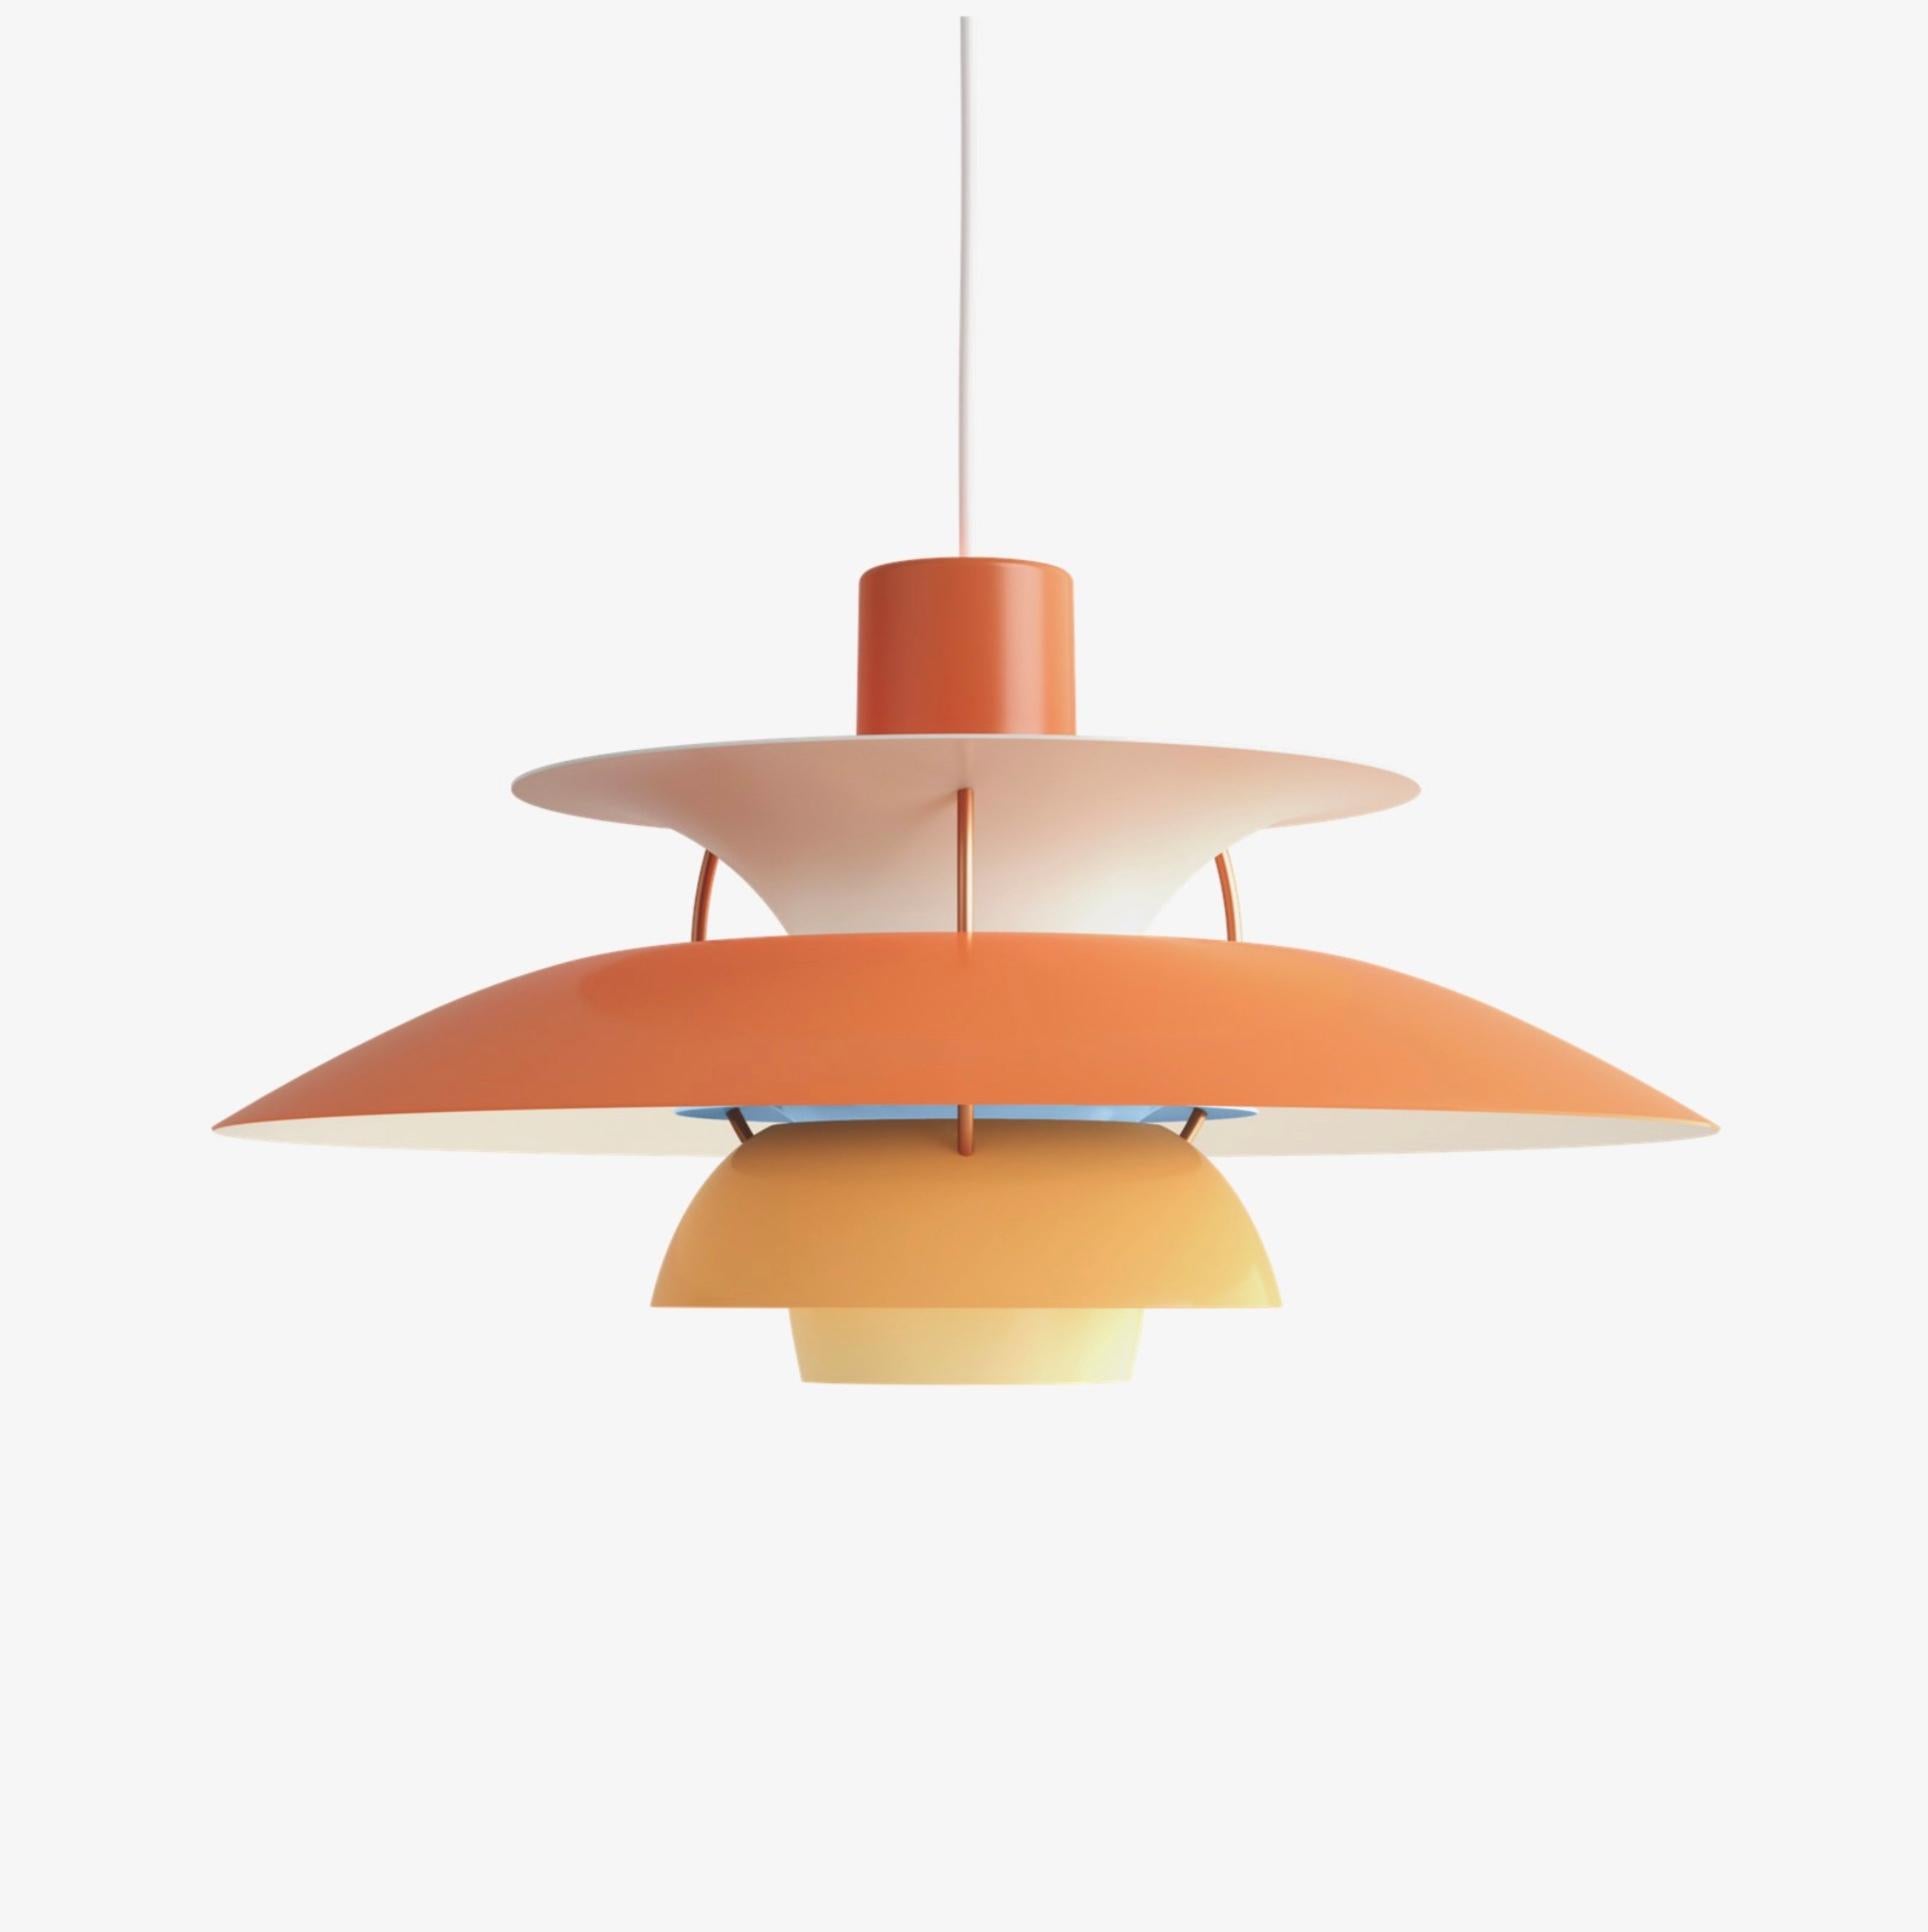 Poul Henningsen PH5 pendant for Louis Poulsen. Denmark. Designed in 1958. New, current production.

Poul Henningsen developed the PH 5 in 1958 in response to constant changes made to the shape and size of incandescent bulbs by bulb manufacturers,